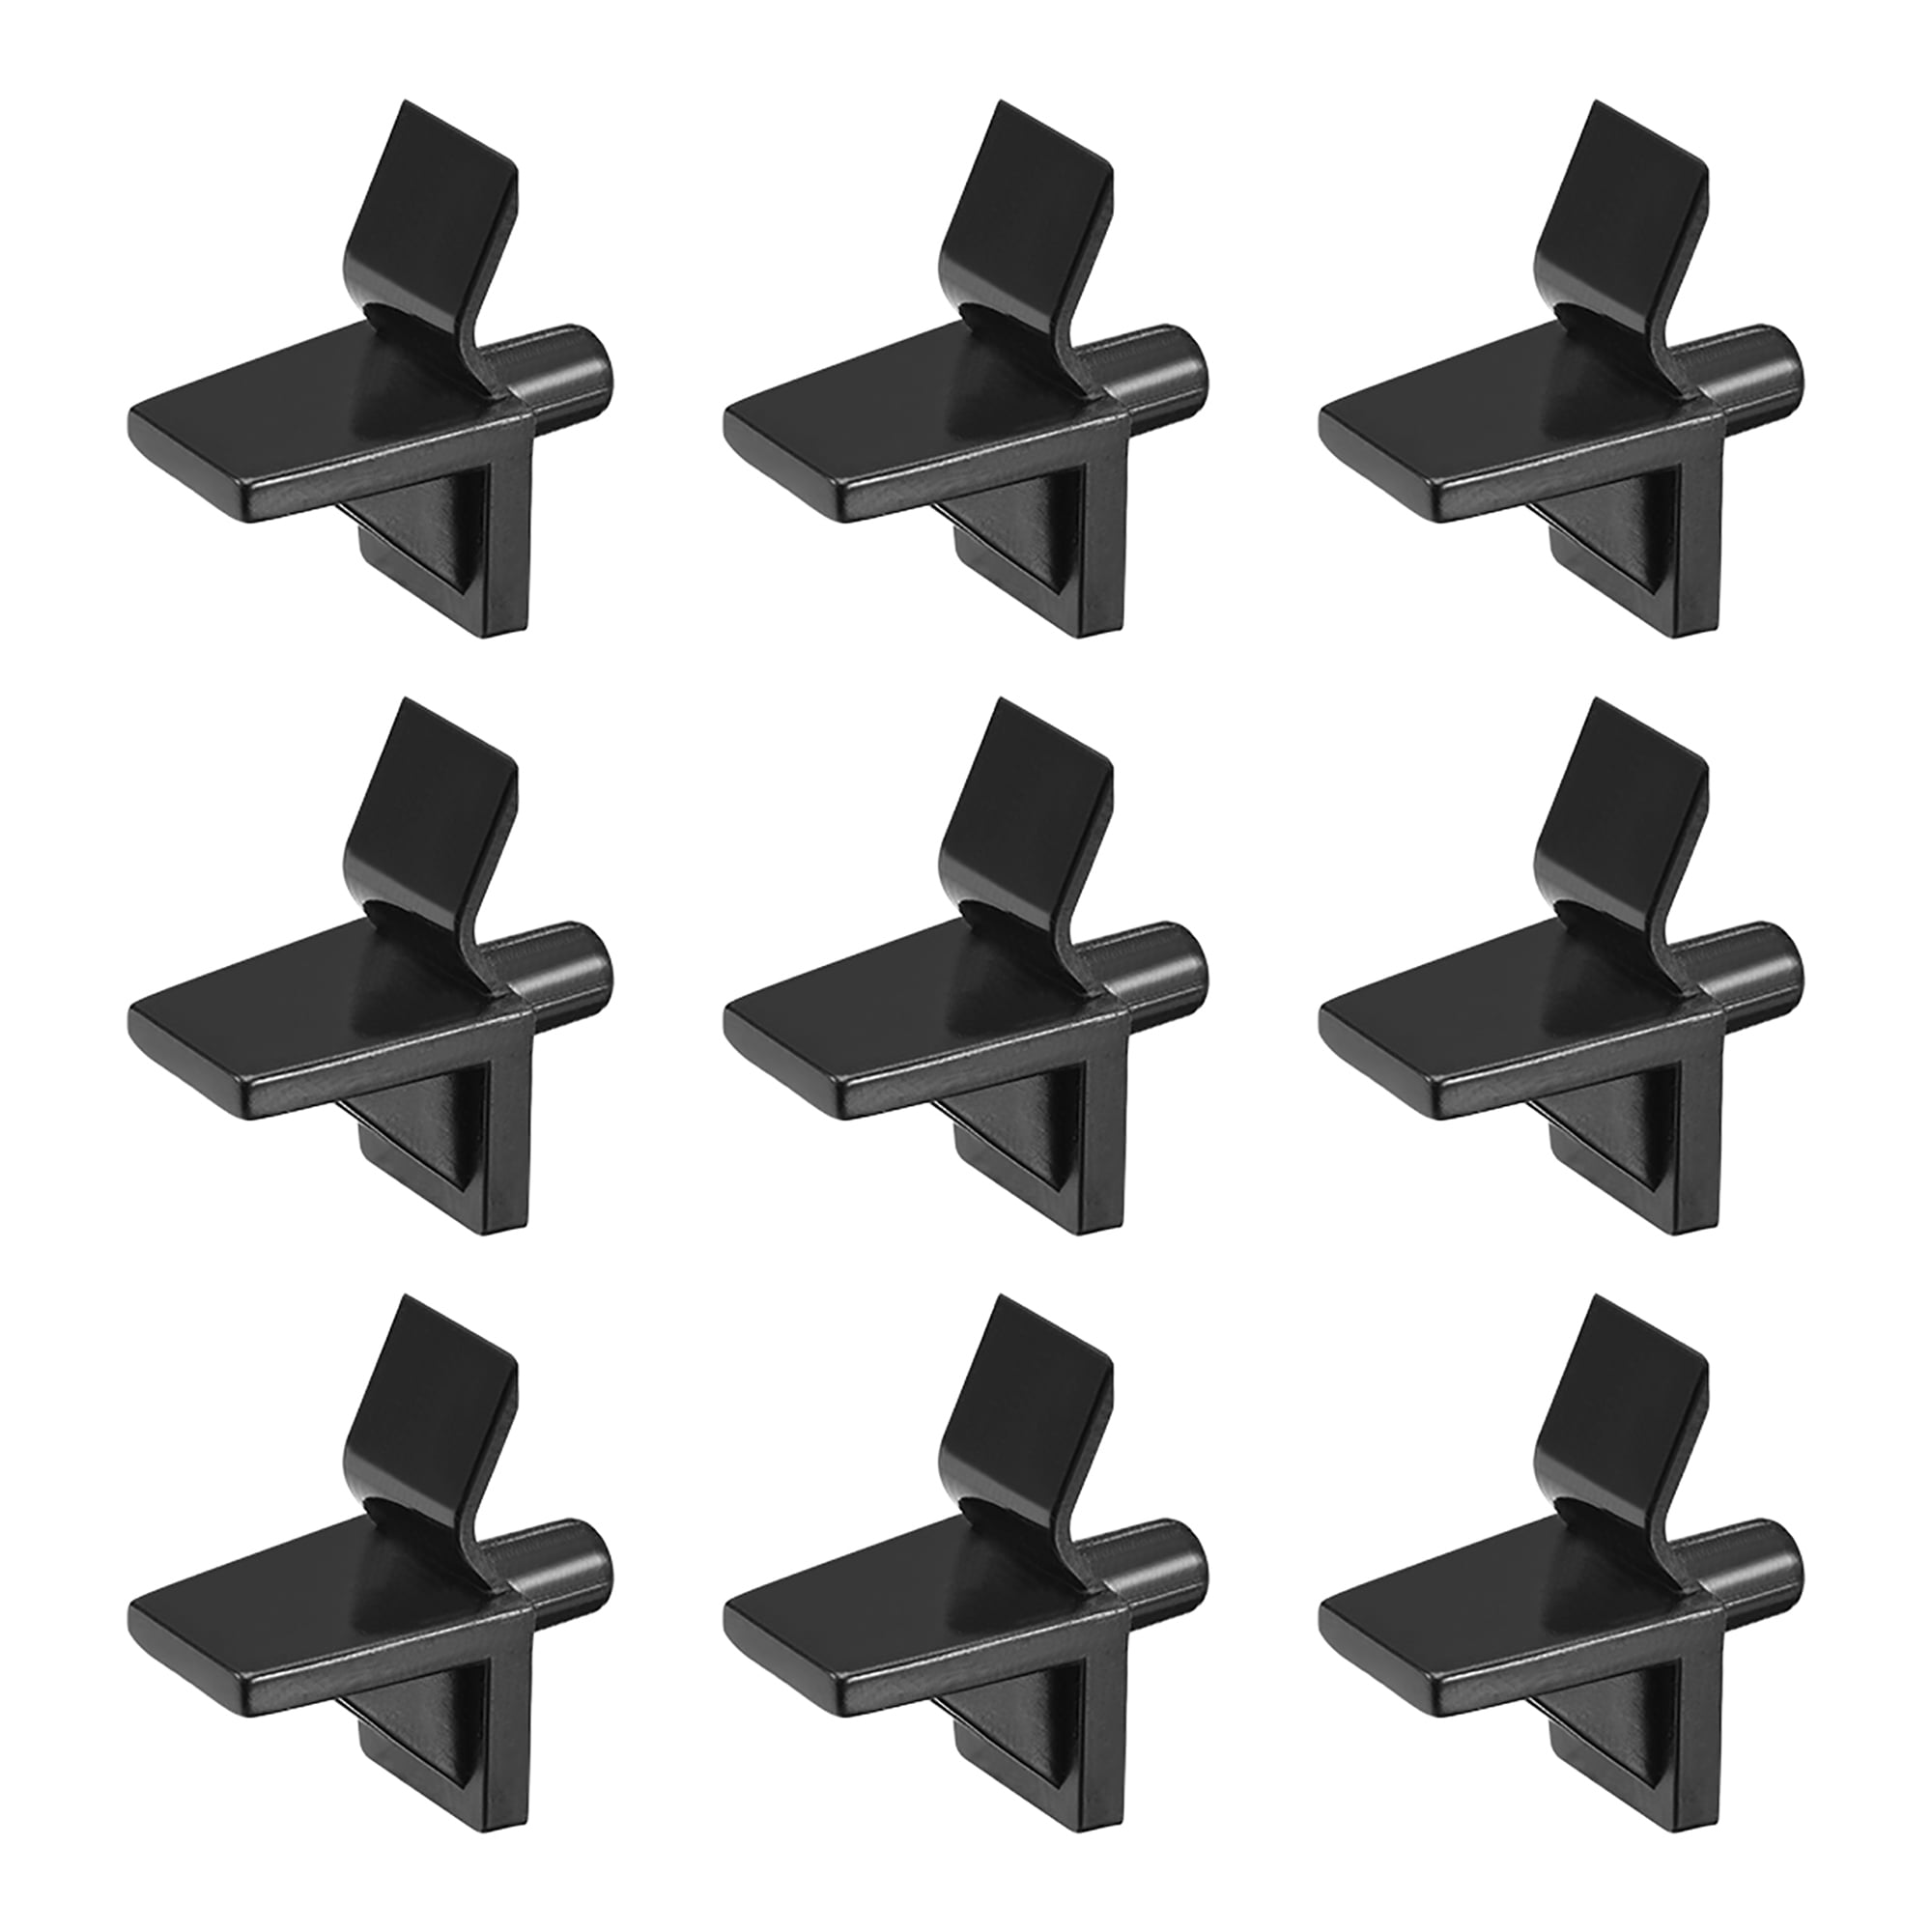 20pcs 14 Studs Plug Pin Glass Board Bracket For Wall Shelves Kitchen Cabinet Building Hardware Edemia Home Improvement